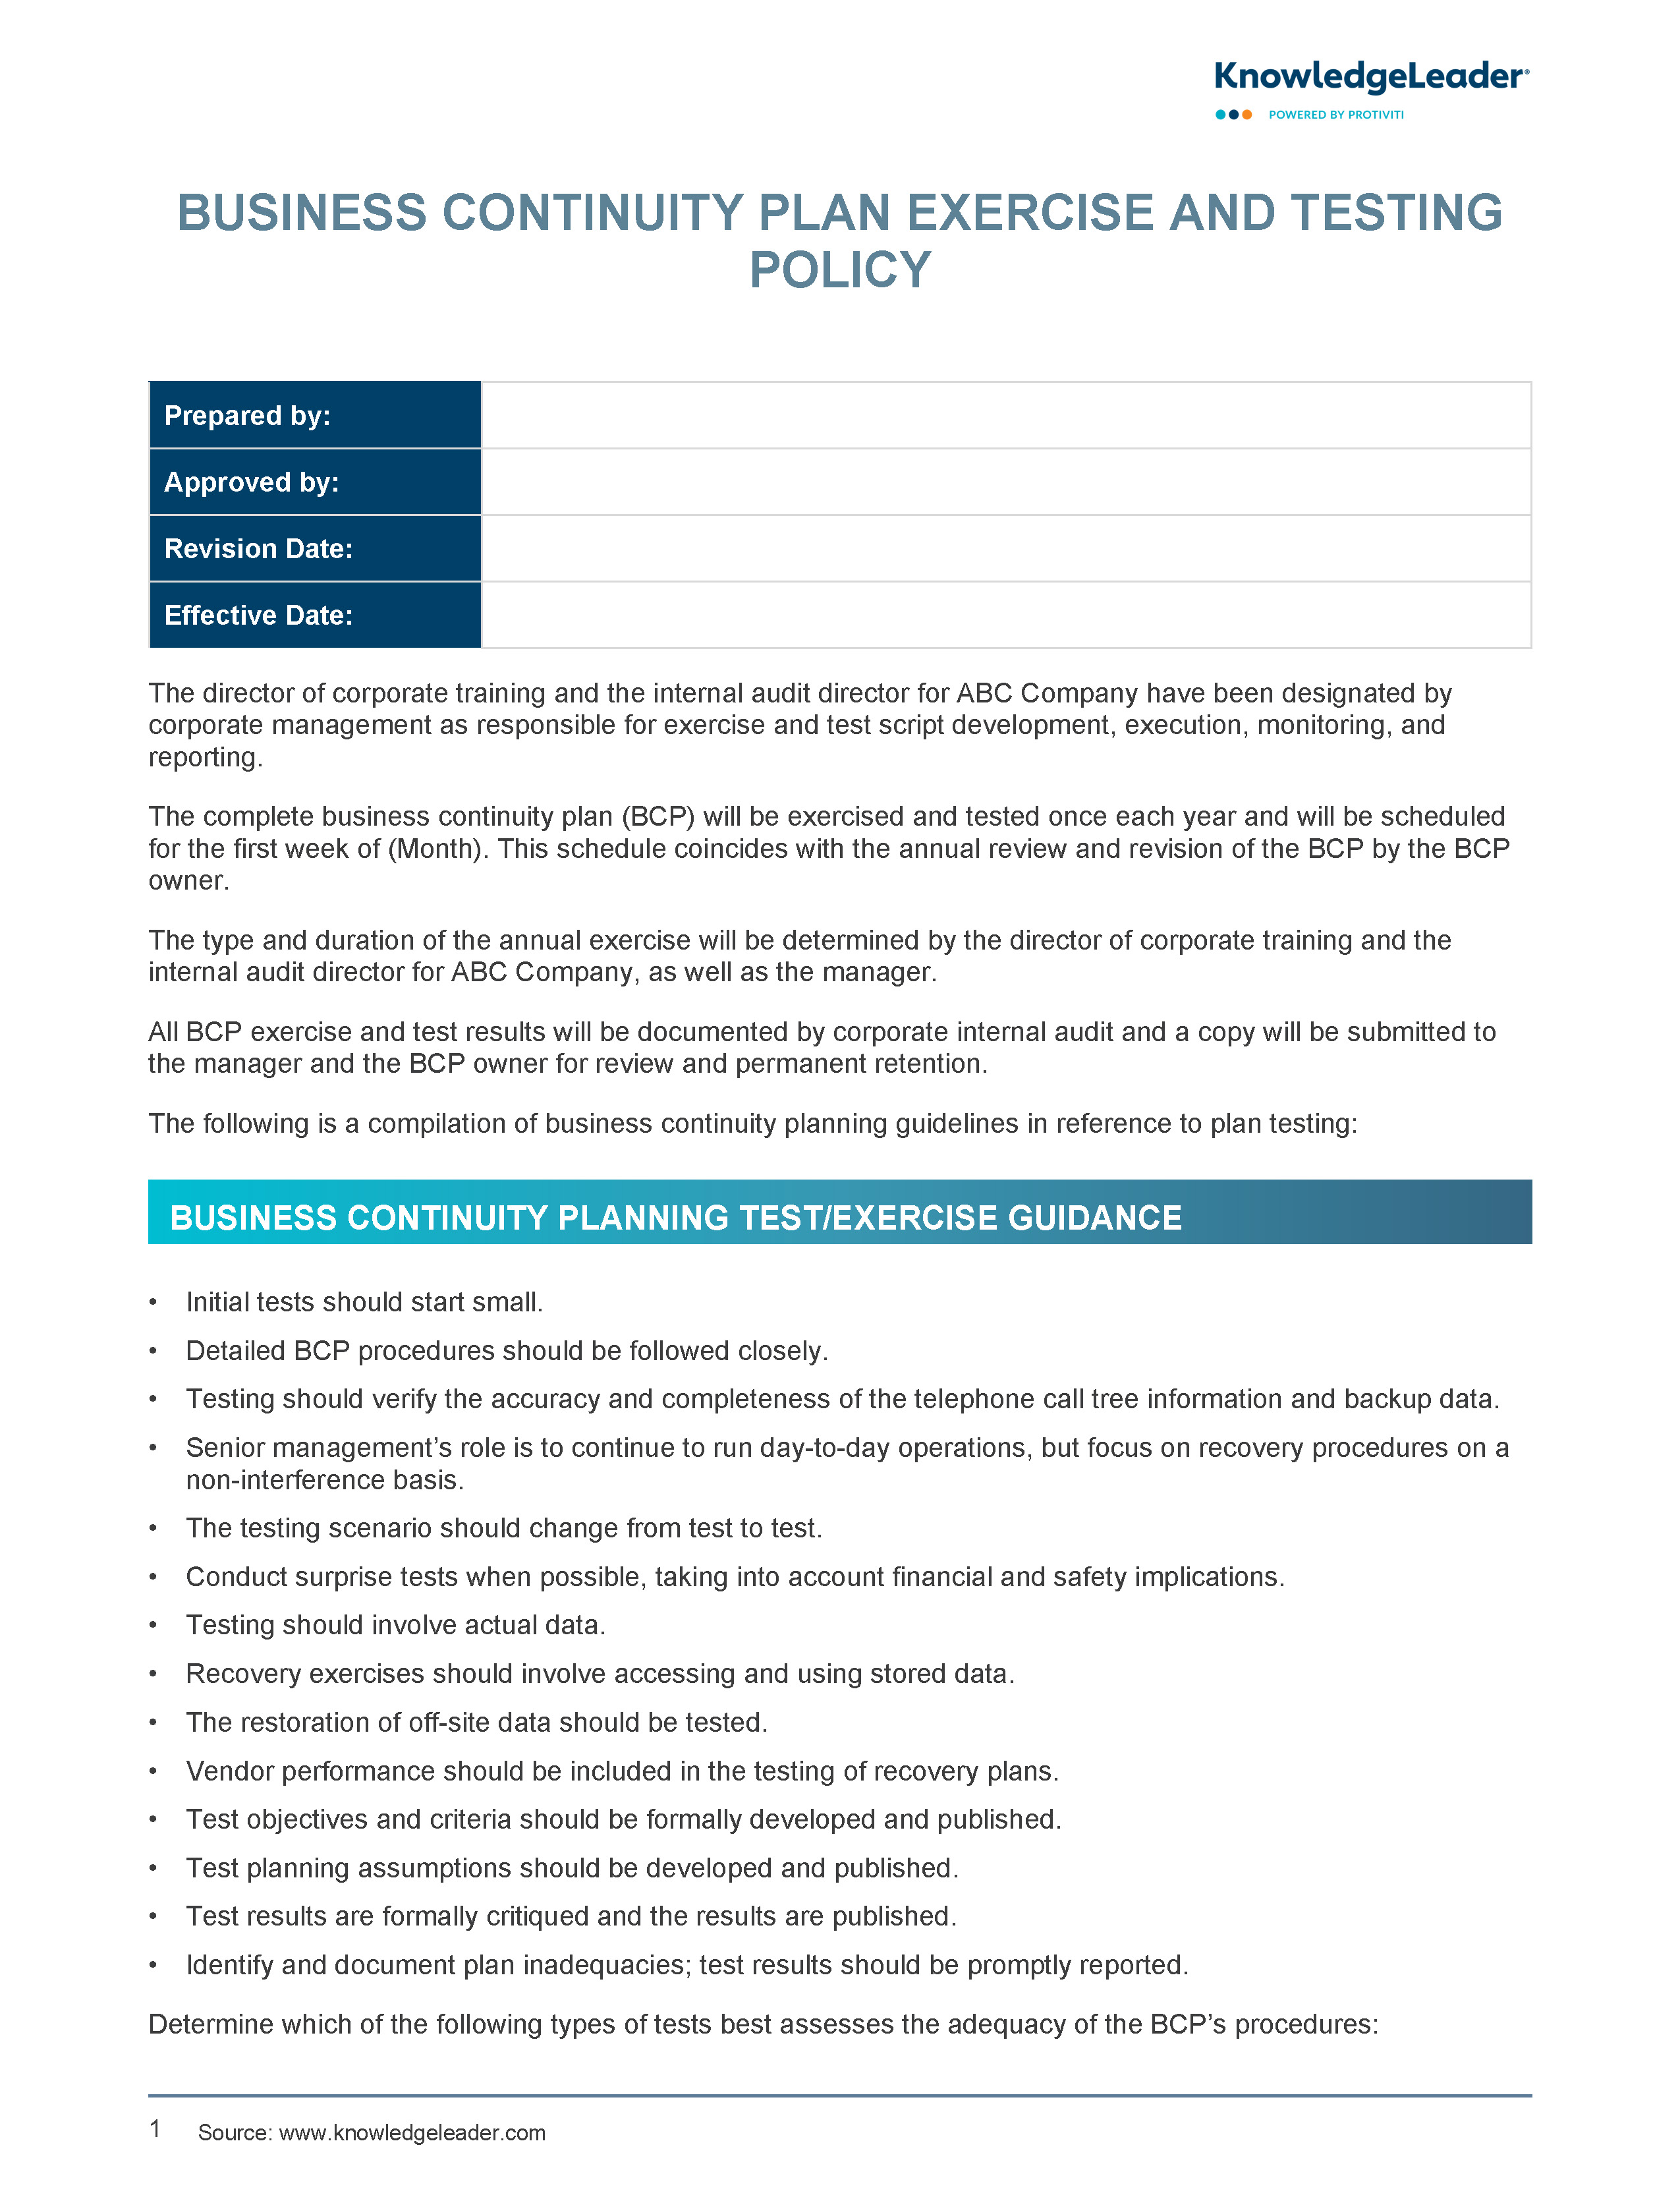 Screenshot of the first page of Business Continuity Plan Exercise and Testing Policy